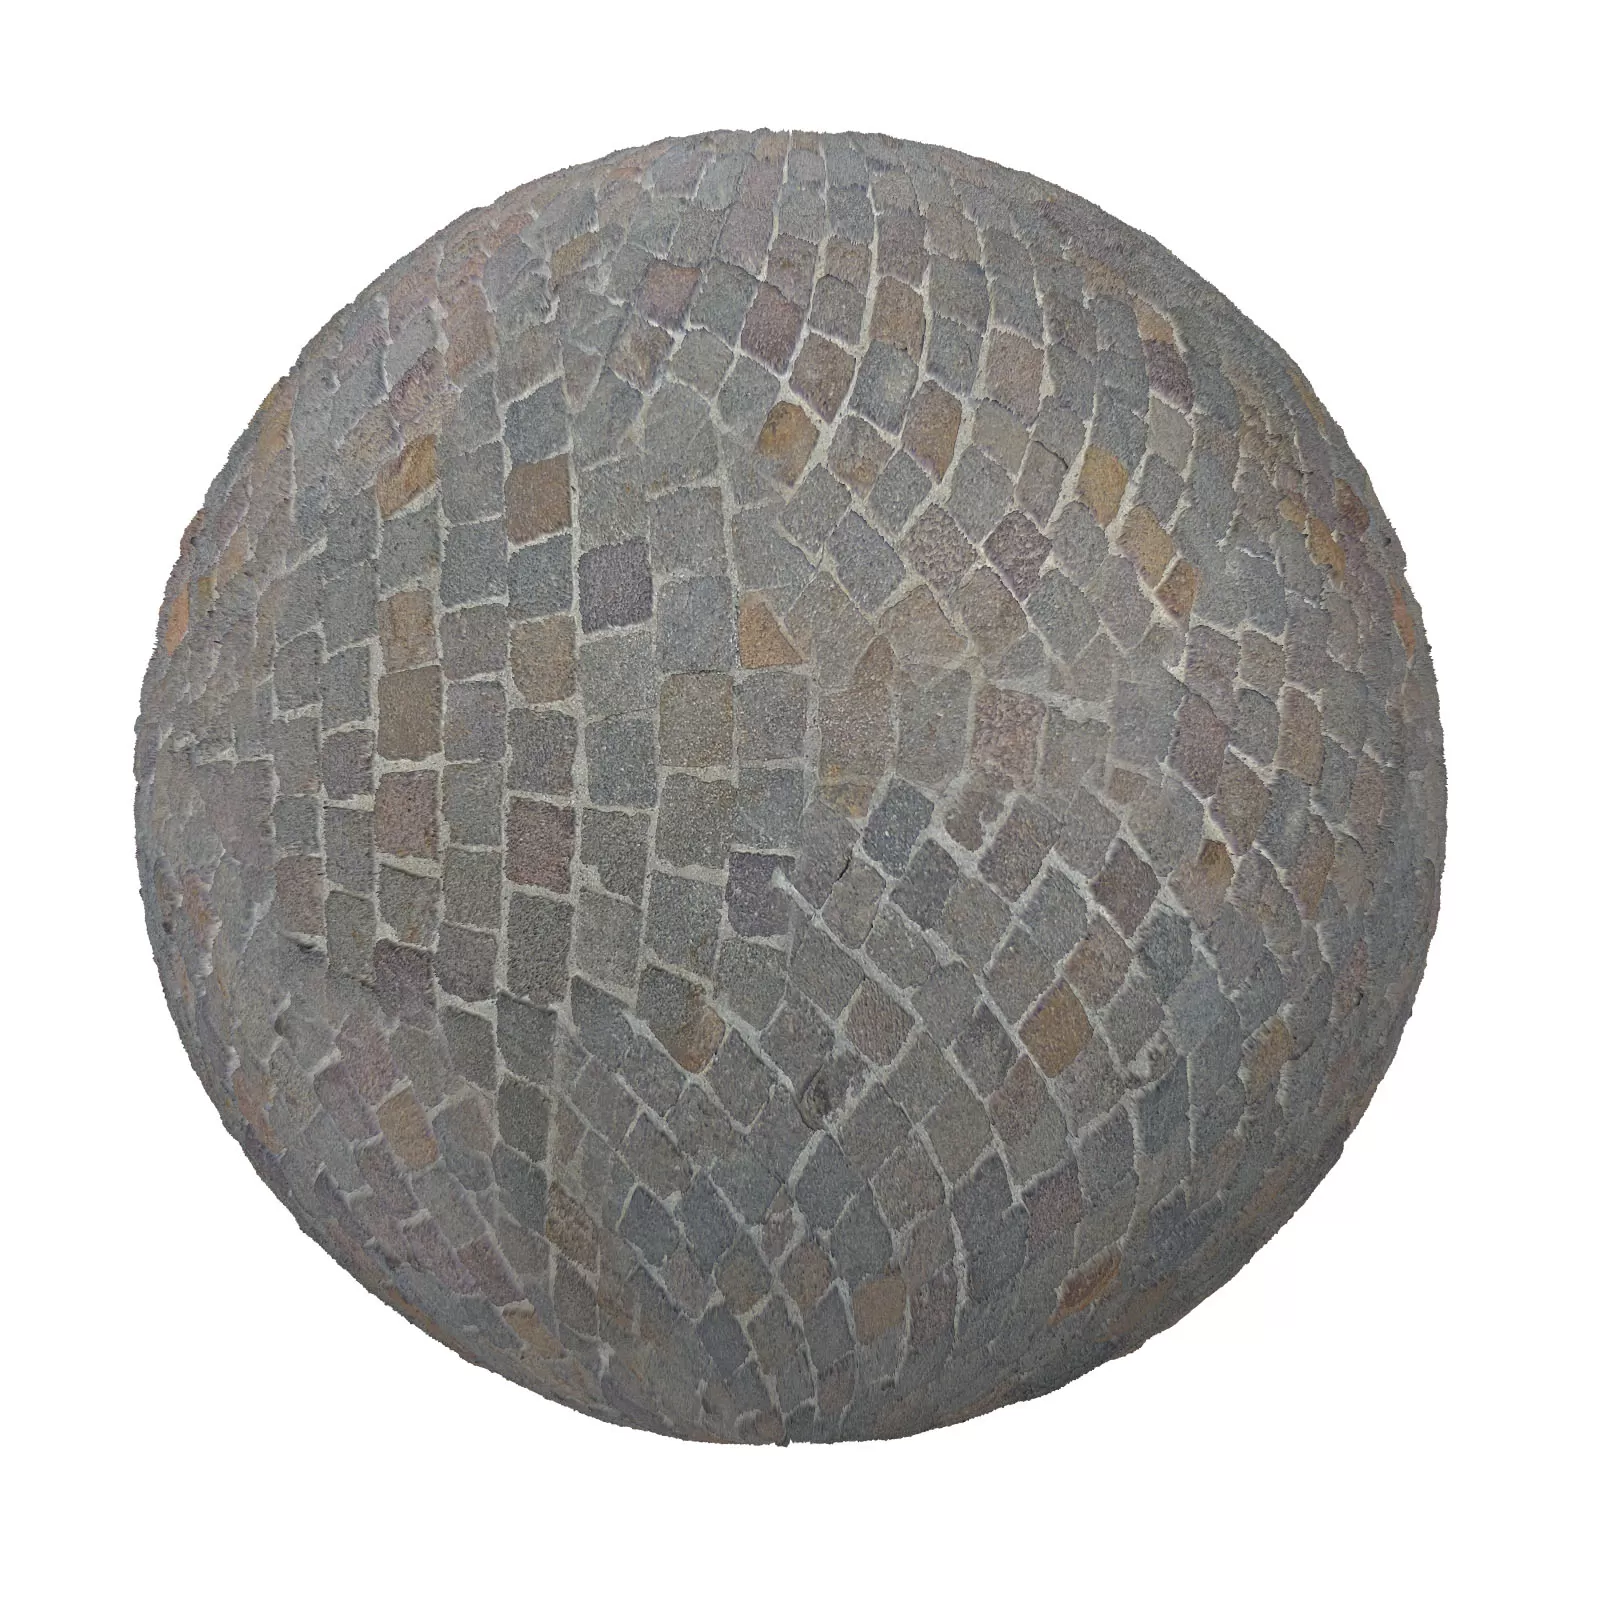 PBR CGAXIS TEXTURES – PAVEMENTS – Stone Pavement 9